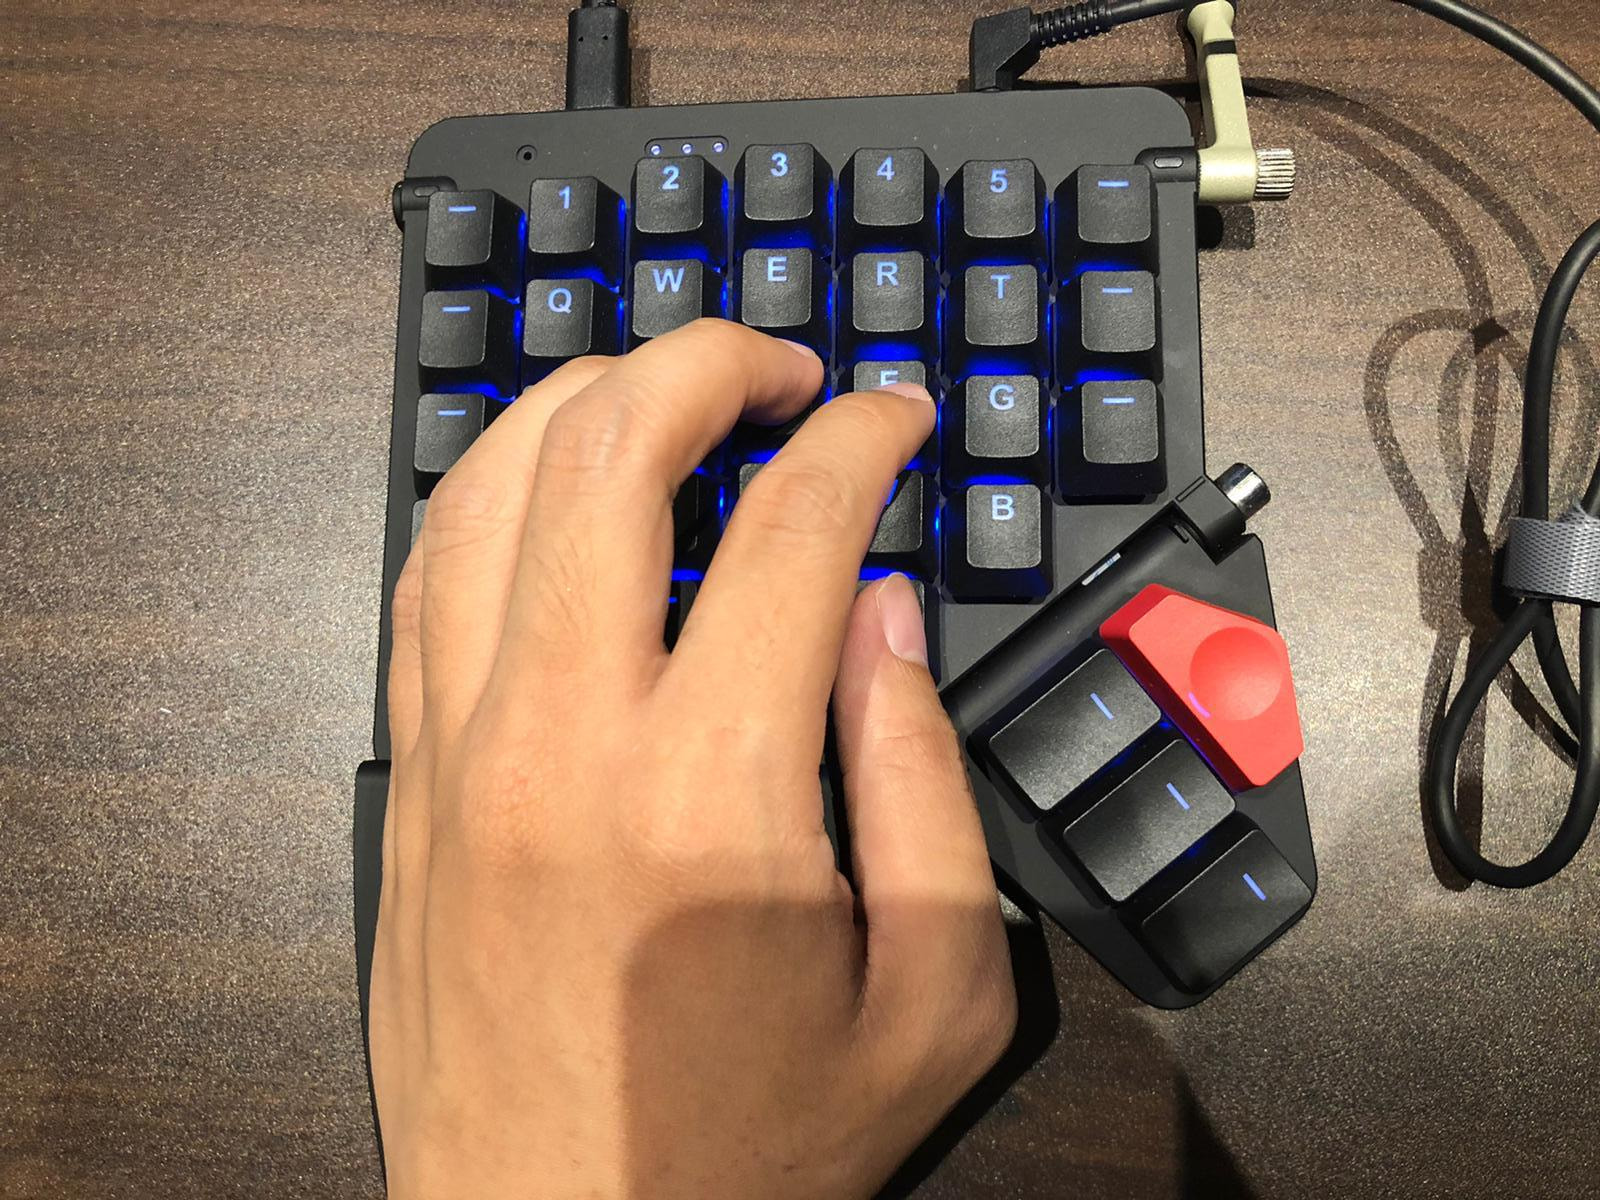 Hands placed on the command key.